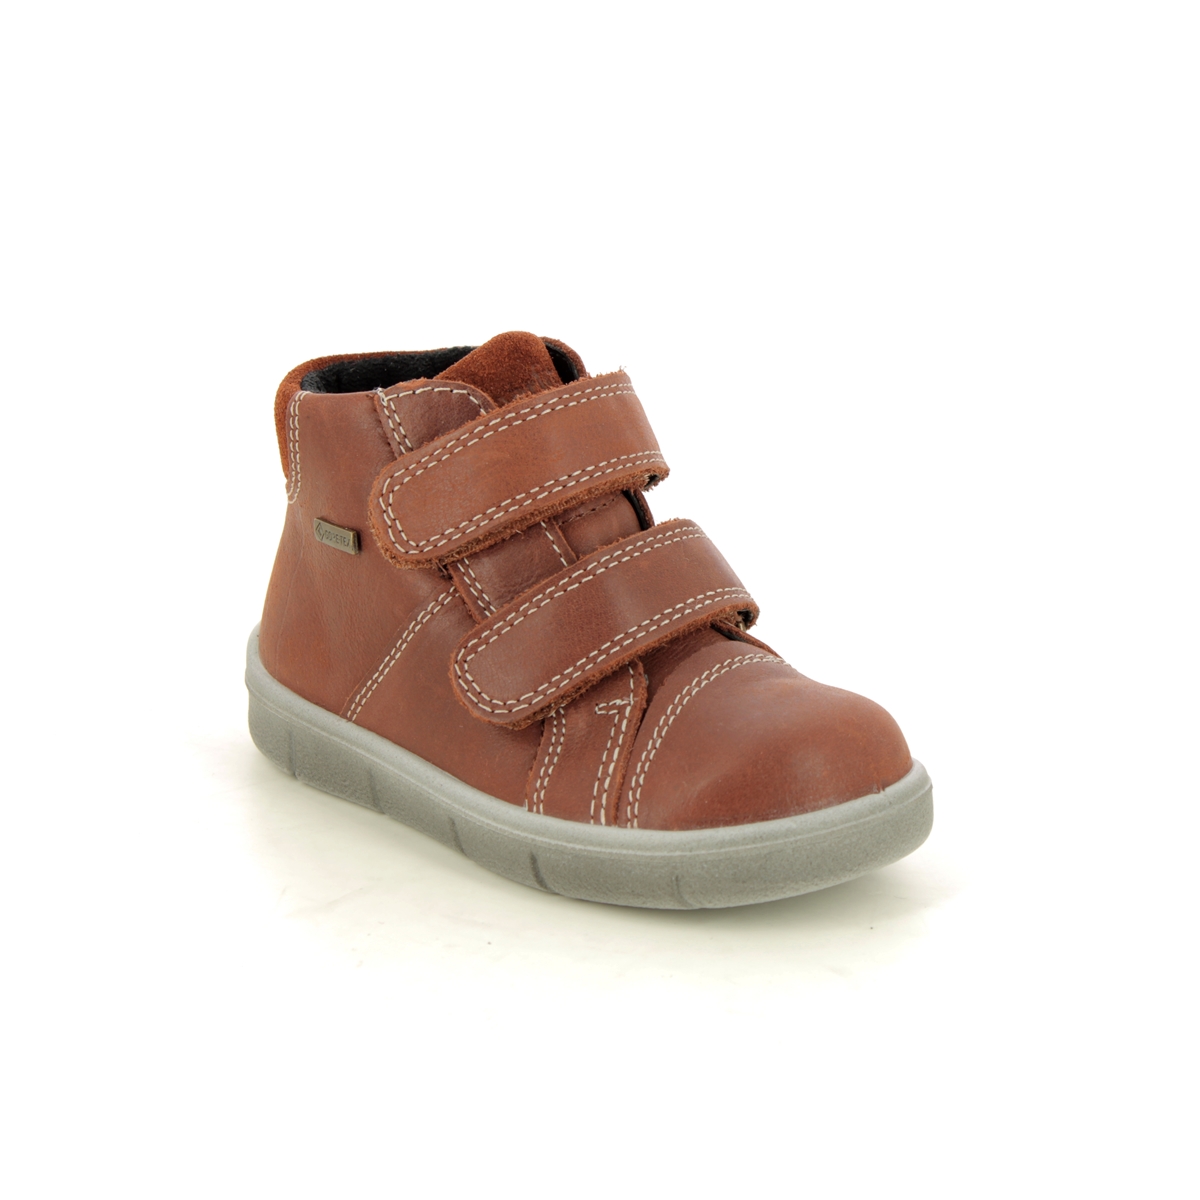 Superfit Ulli 2V Gtx Tan Leather  Kids Toddler Boys Boots 0800423-3000 In Size 27 In Plain Tan Leather